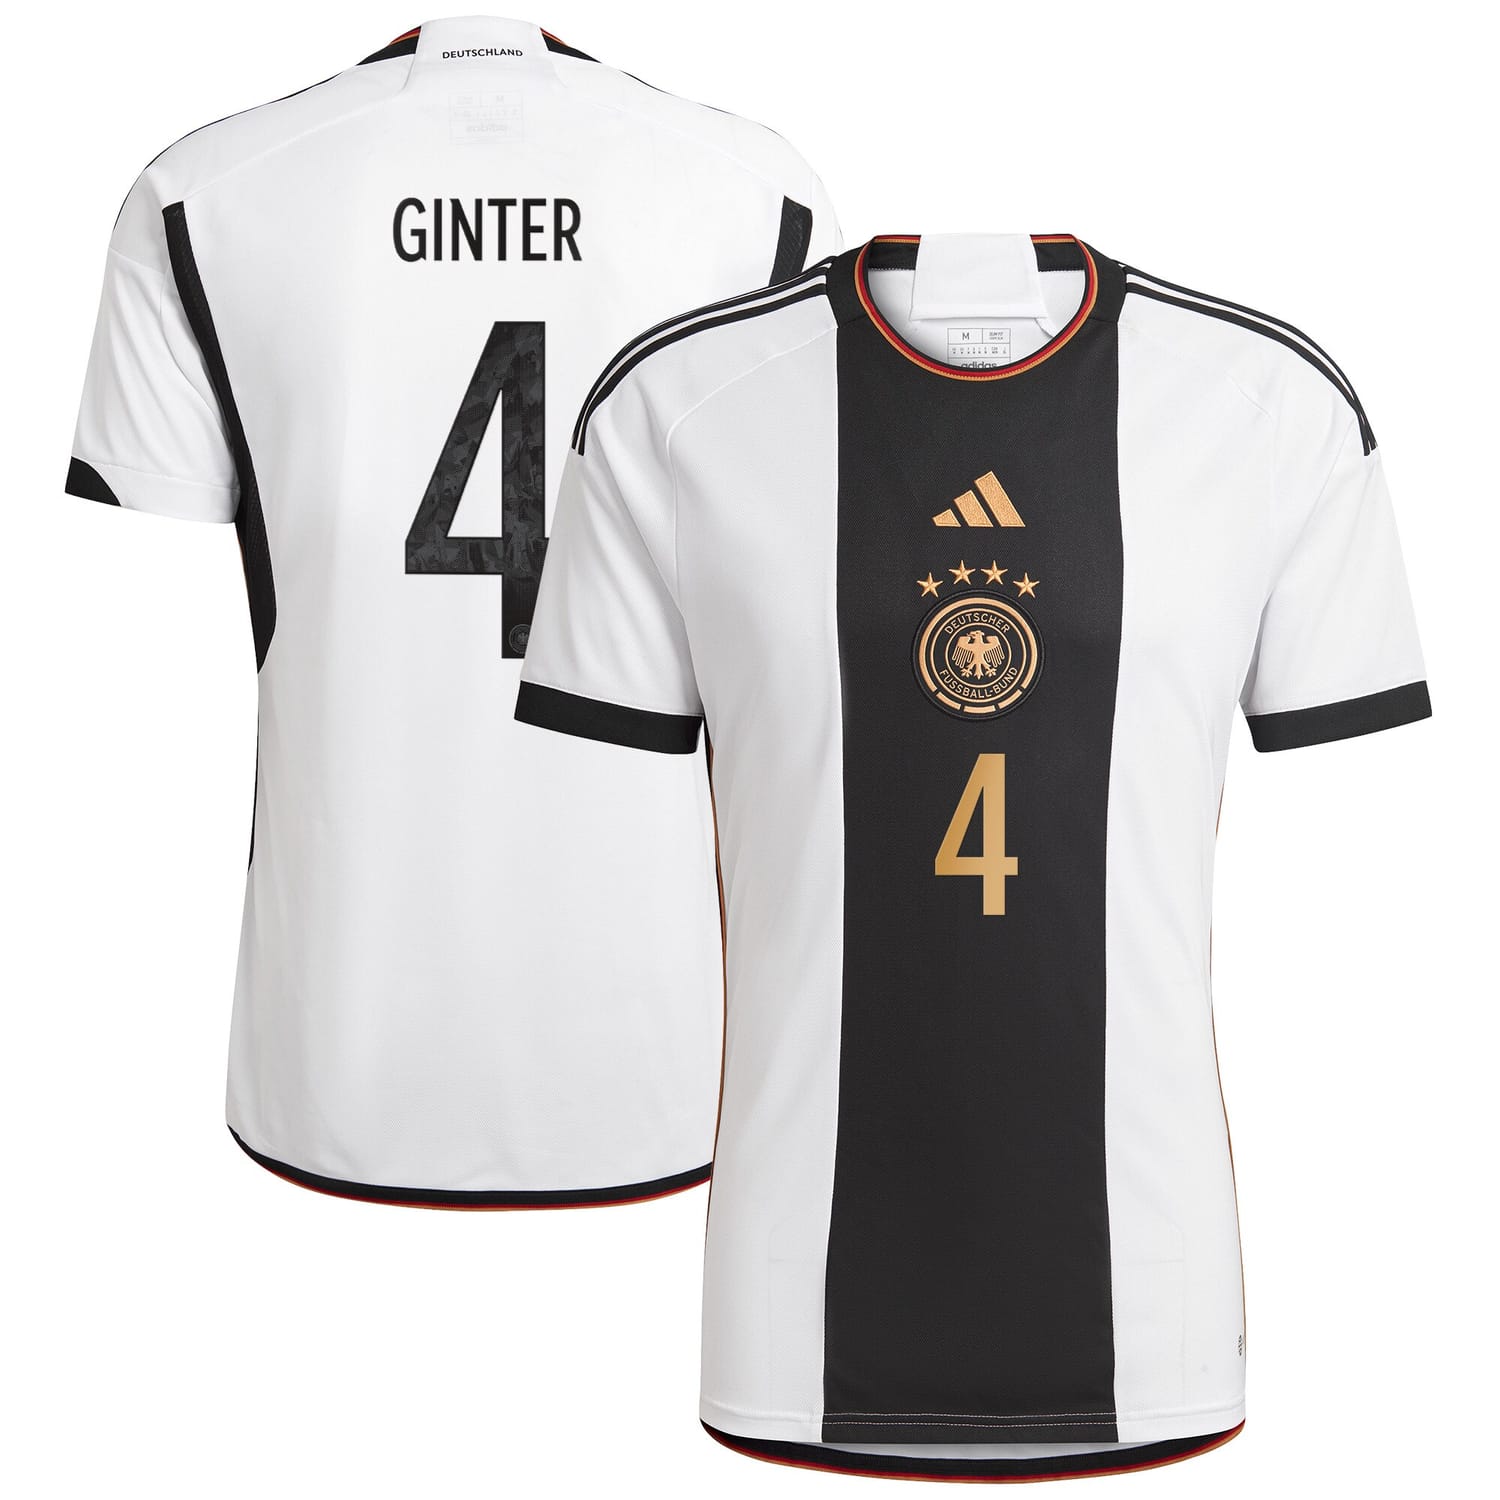 Germany National Team Home Jersey Shirt player Matthias Ginter 4 printing for Men